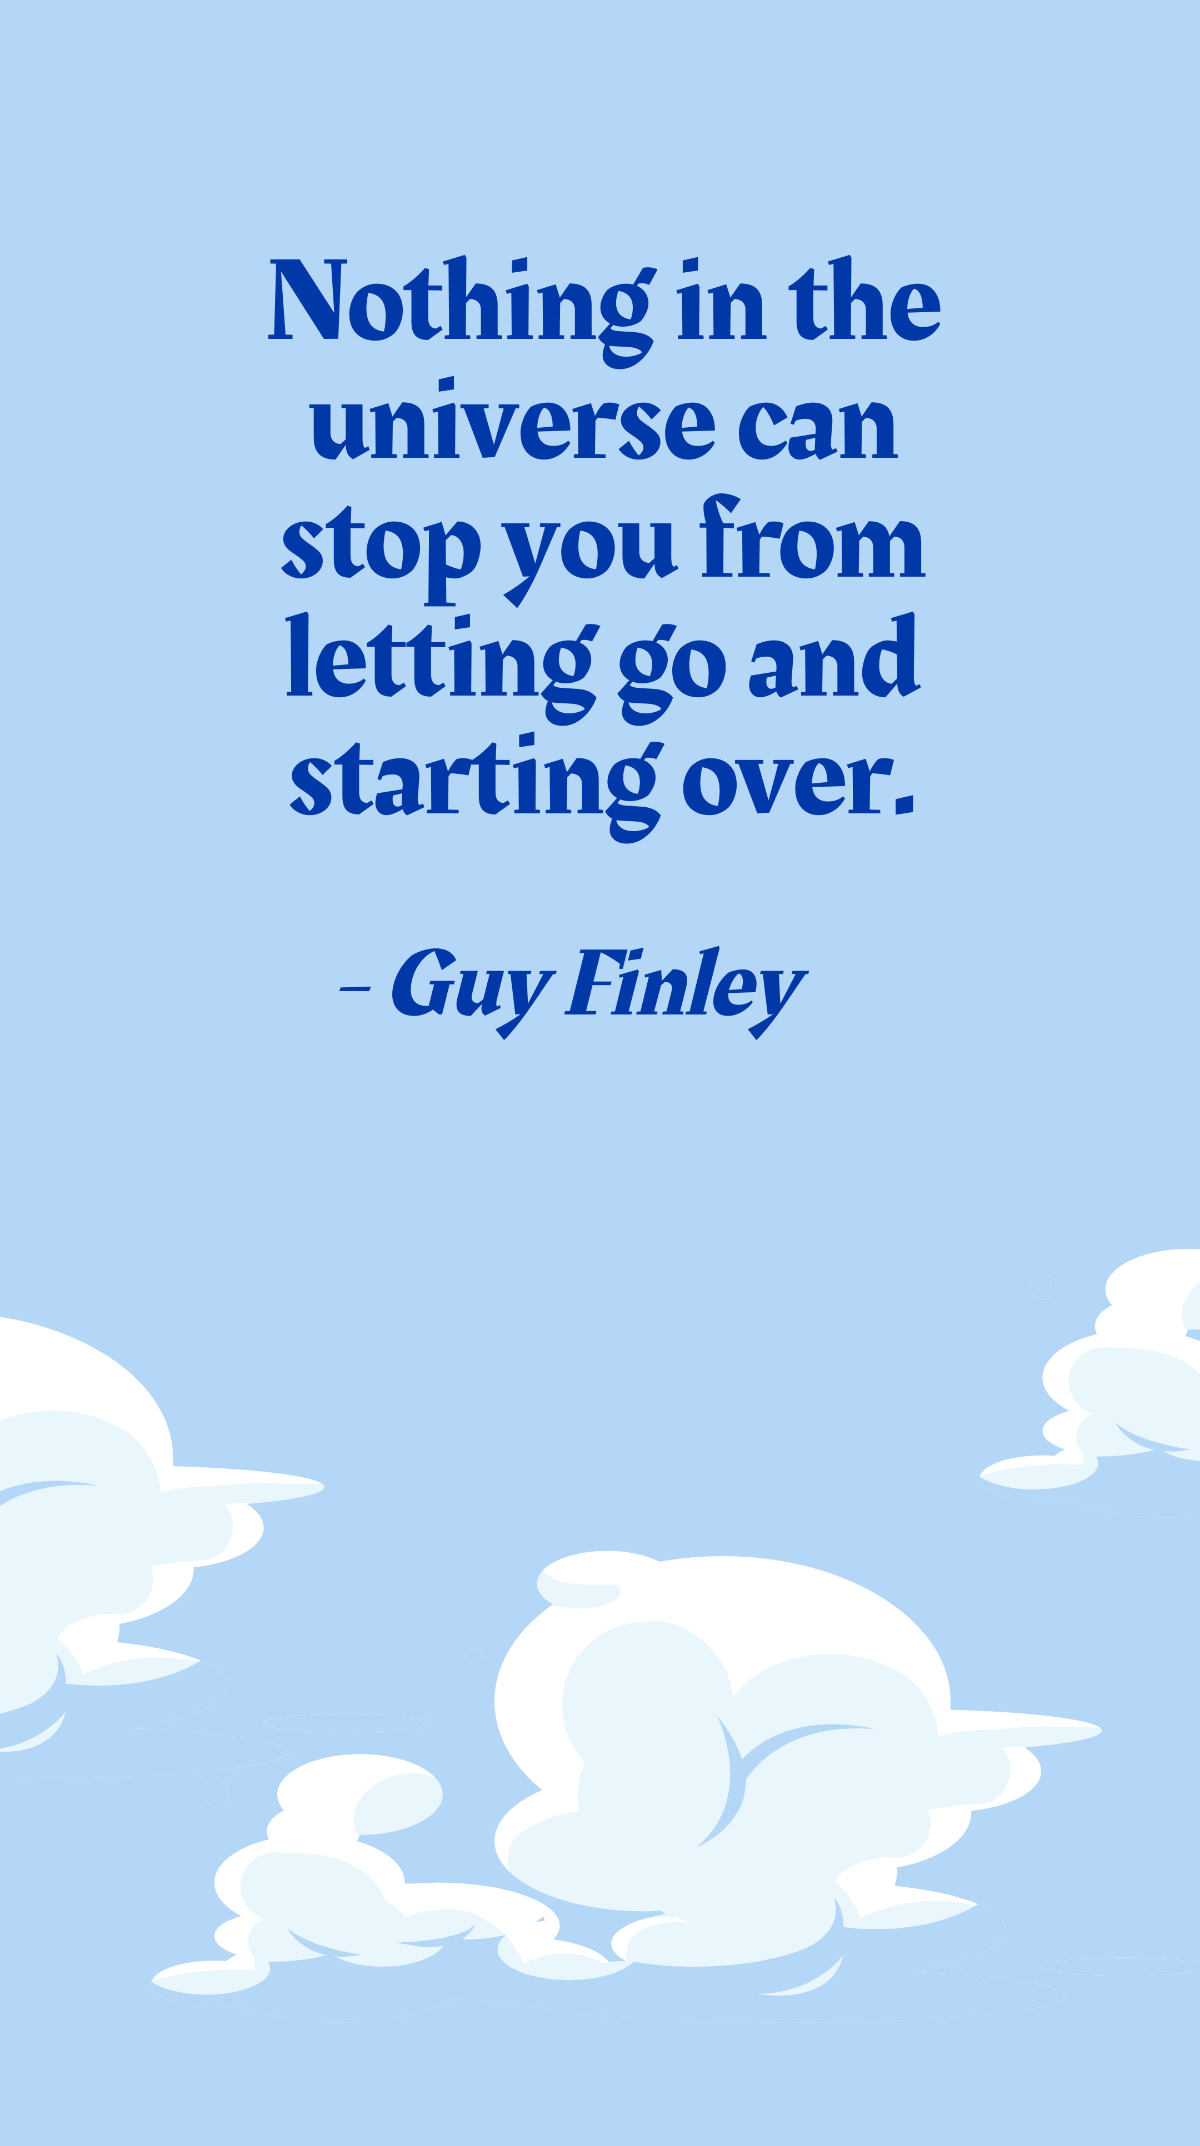 Guy Finley - Nothing in the universe can stop you from letting go and starting over.